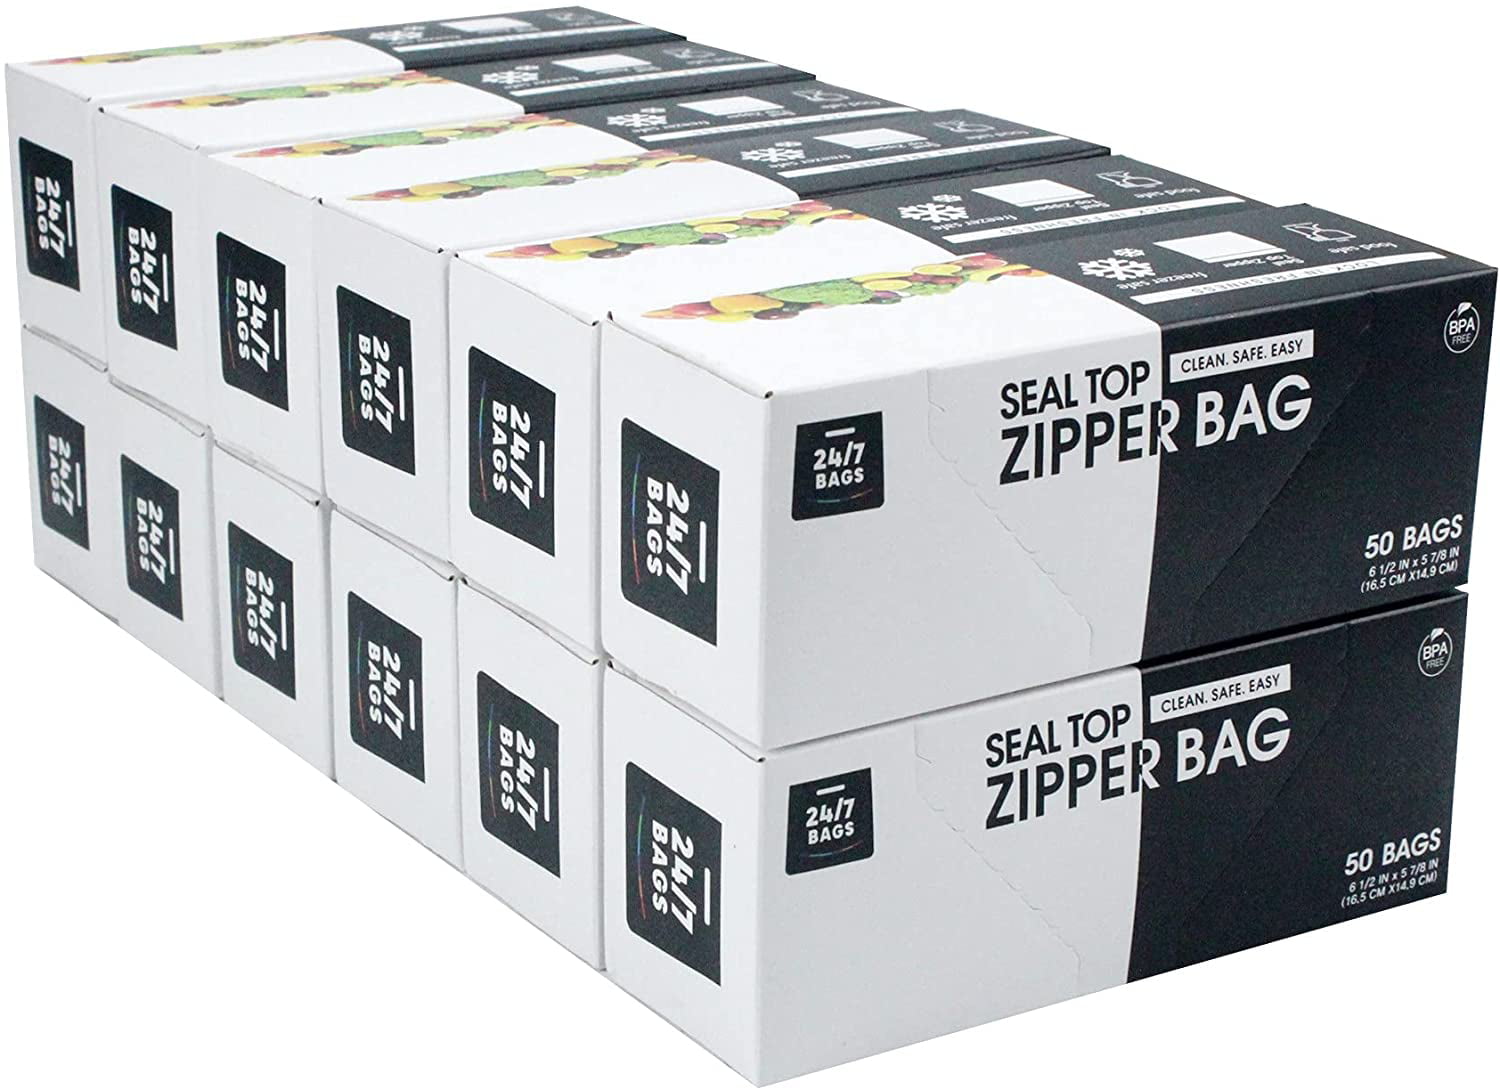 24/7 Bags - Double Zipper Gallon Storage Bags, 200 Count (4 Packs of 50), Size: Gallon - 200 Bags, Clear